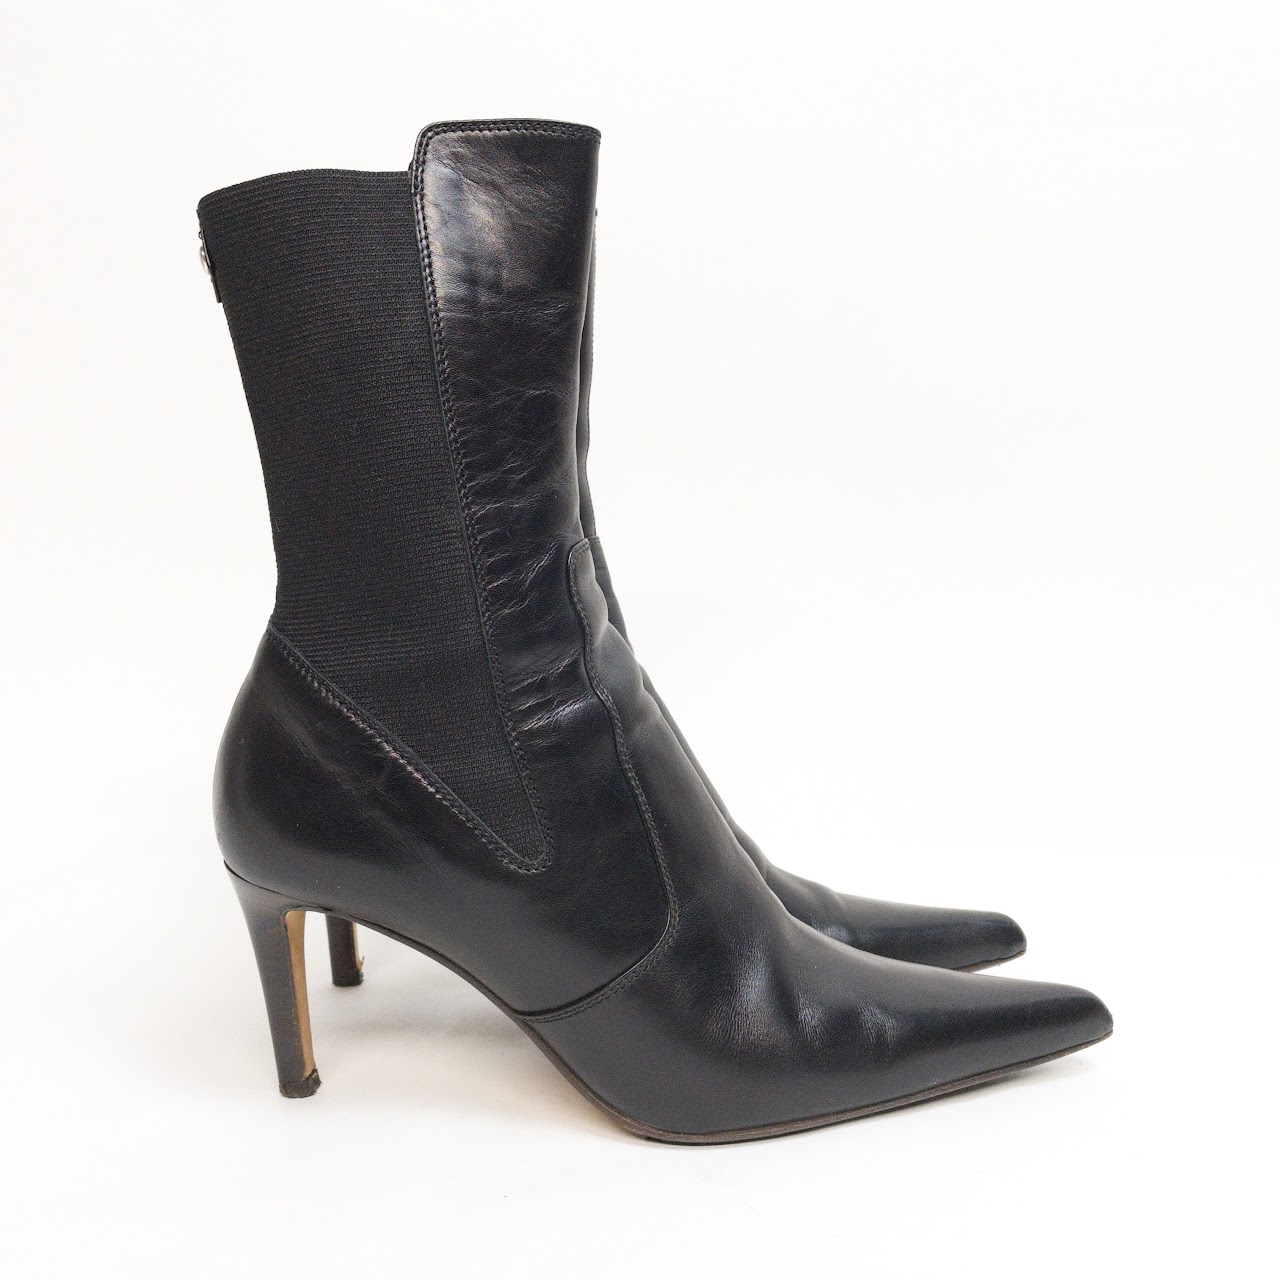 Yves Saint Laurent Pointed Toe Boots